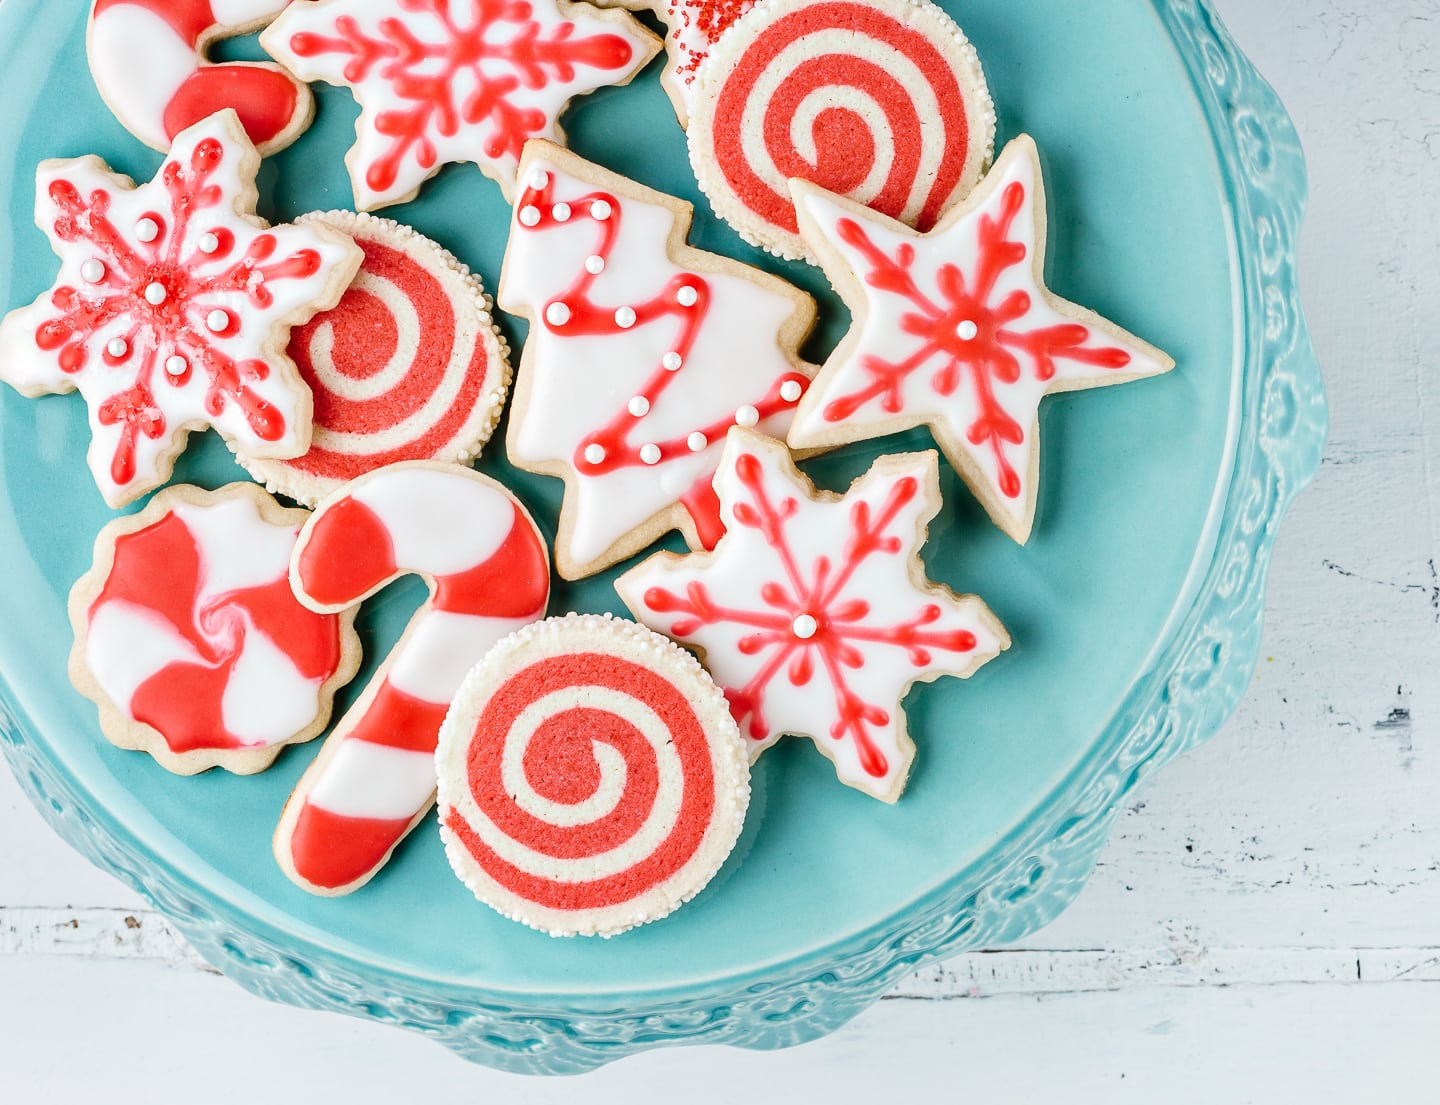 A plate of Christmas sugar cookies all decorated in red and white royal icing